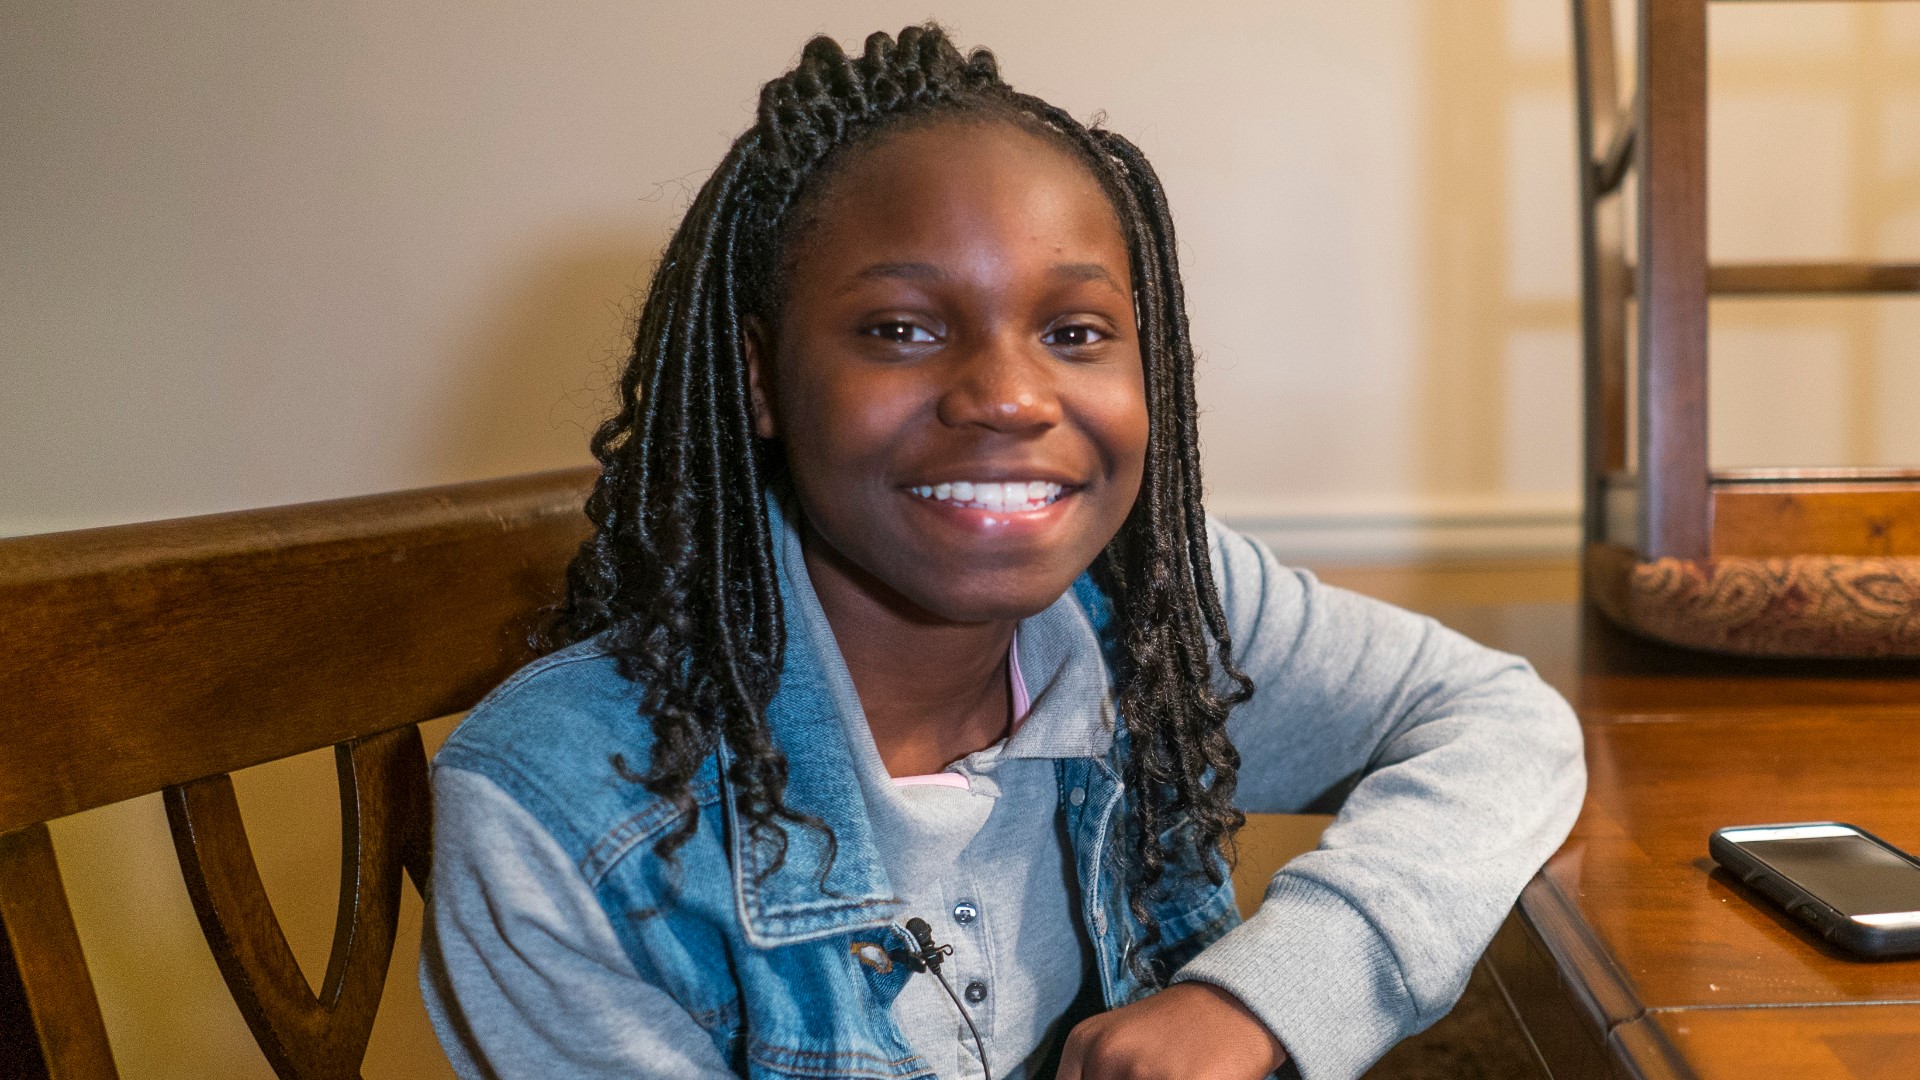 “She’s shy,” Shatorria’s sister, Destiney Gladden, said. “But once you get to know her, she opens up to you. She’s very playful.”